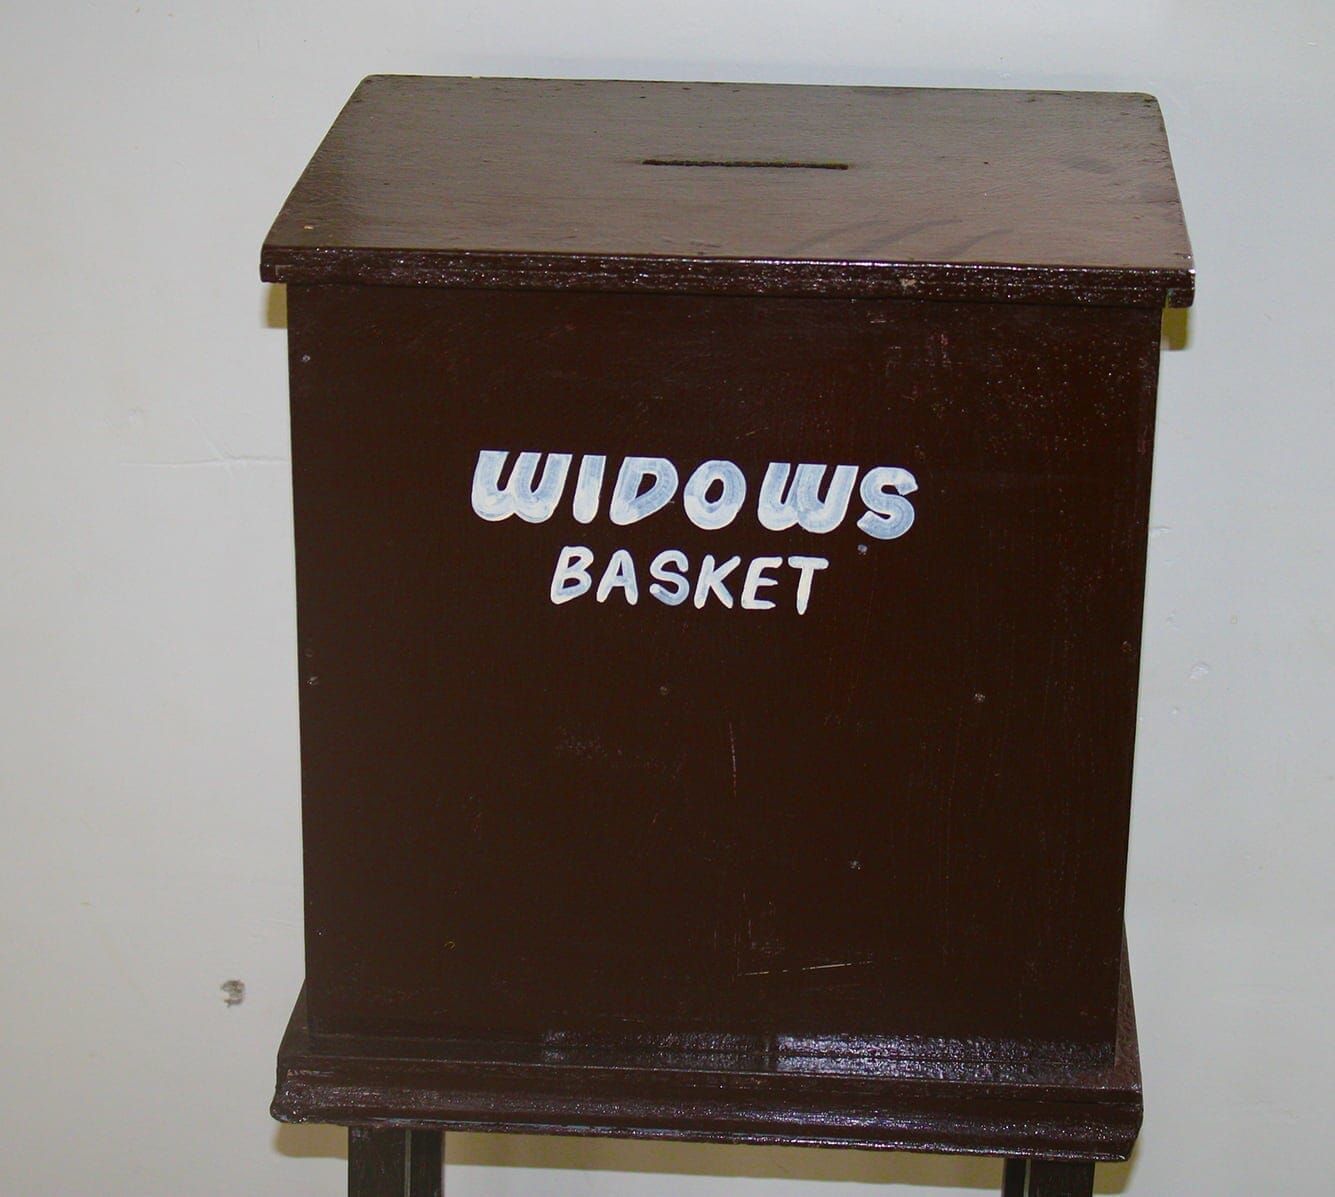 Offering box for widows at church